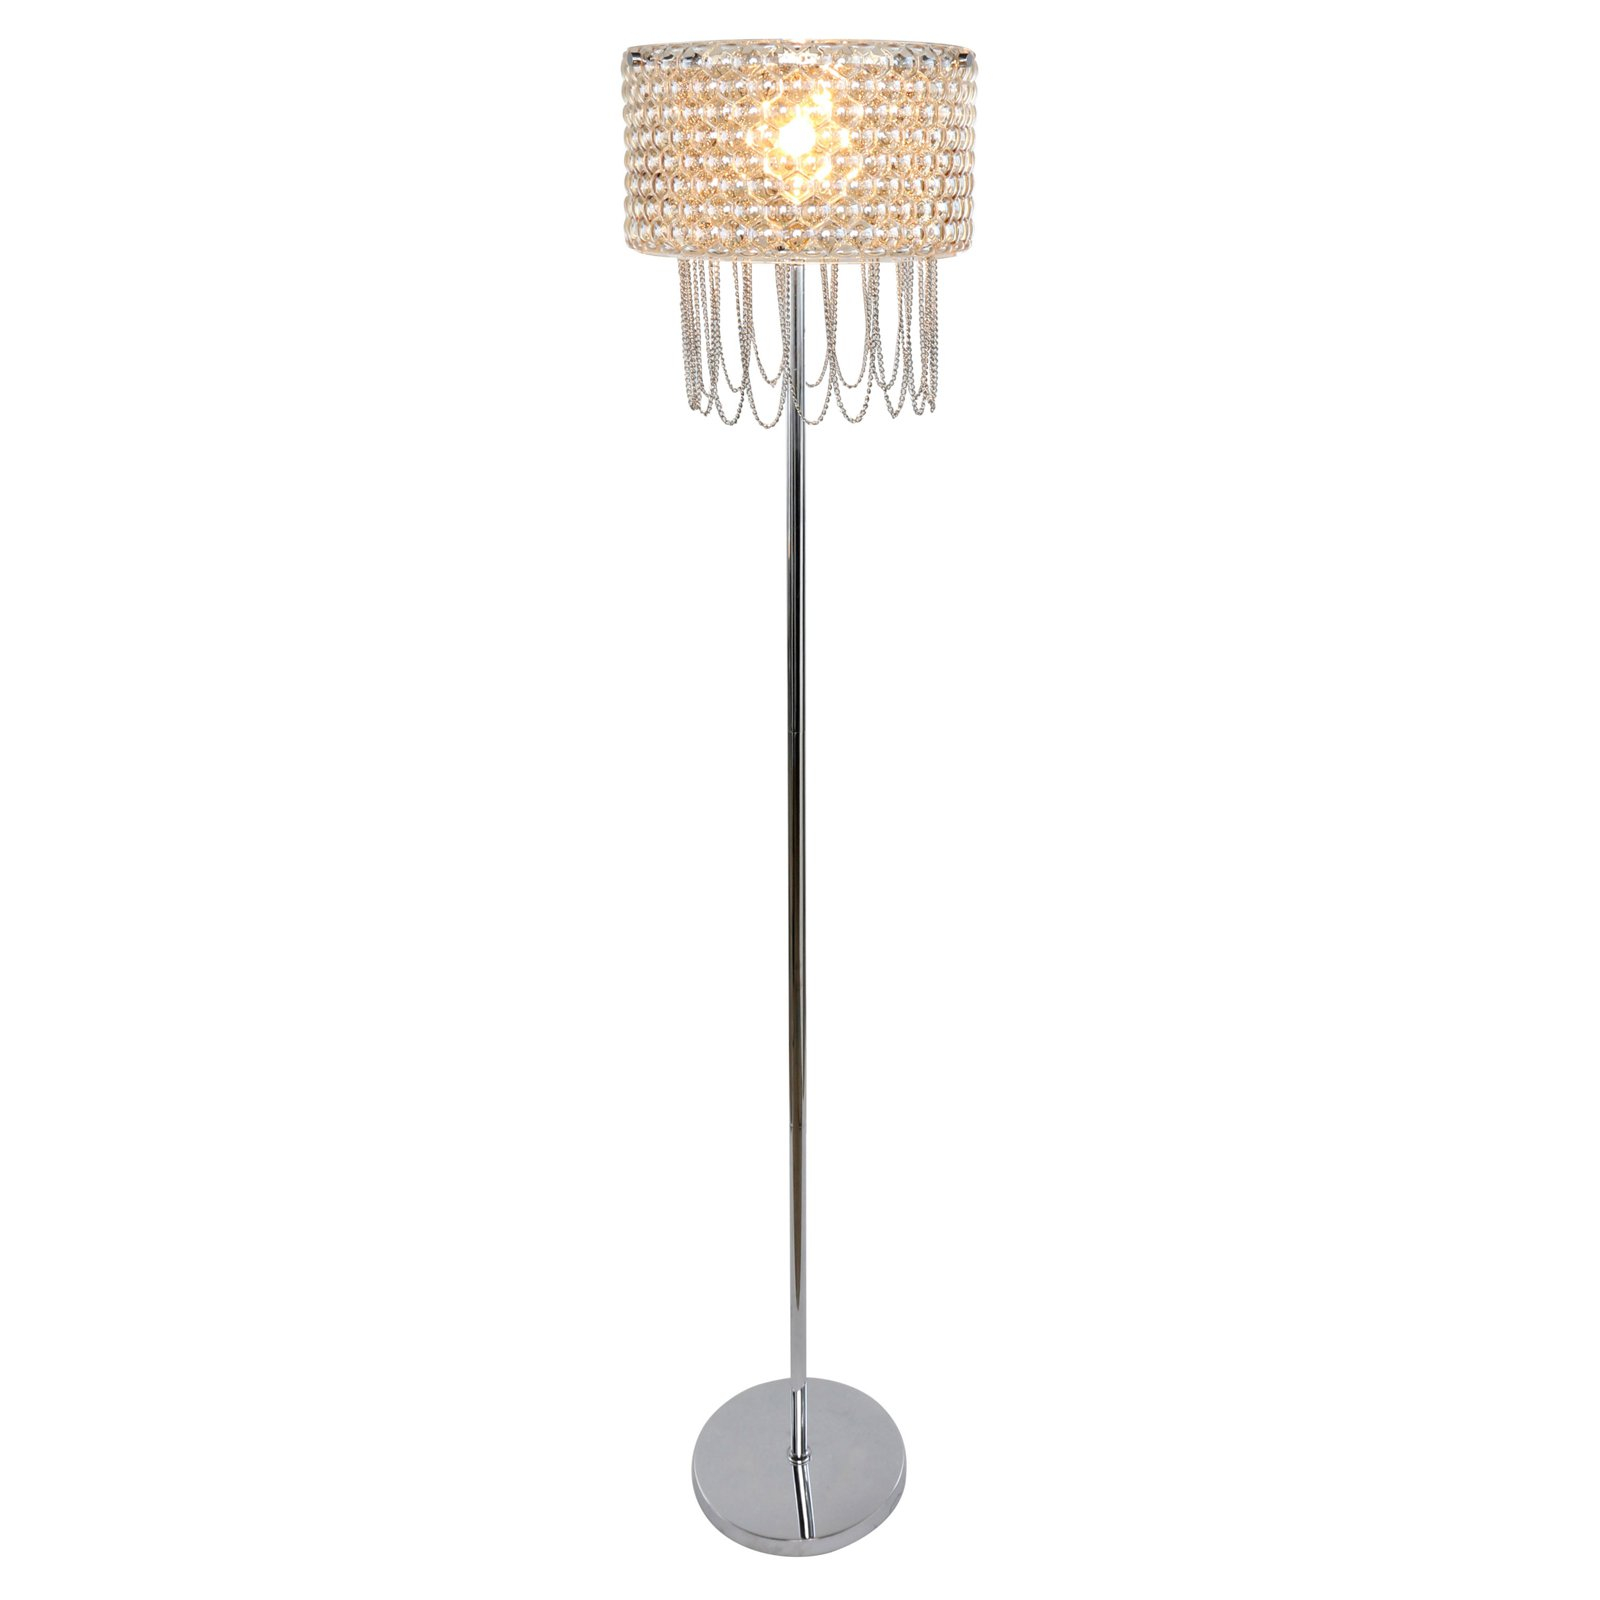 Glam Floor Lamps Hayneedle Lamp Glamorous Mother Of Pearl intended for sizing 1600 X 1600